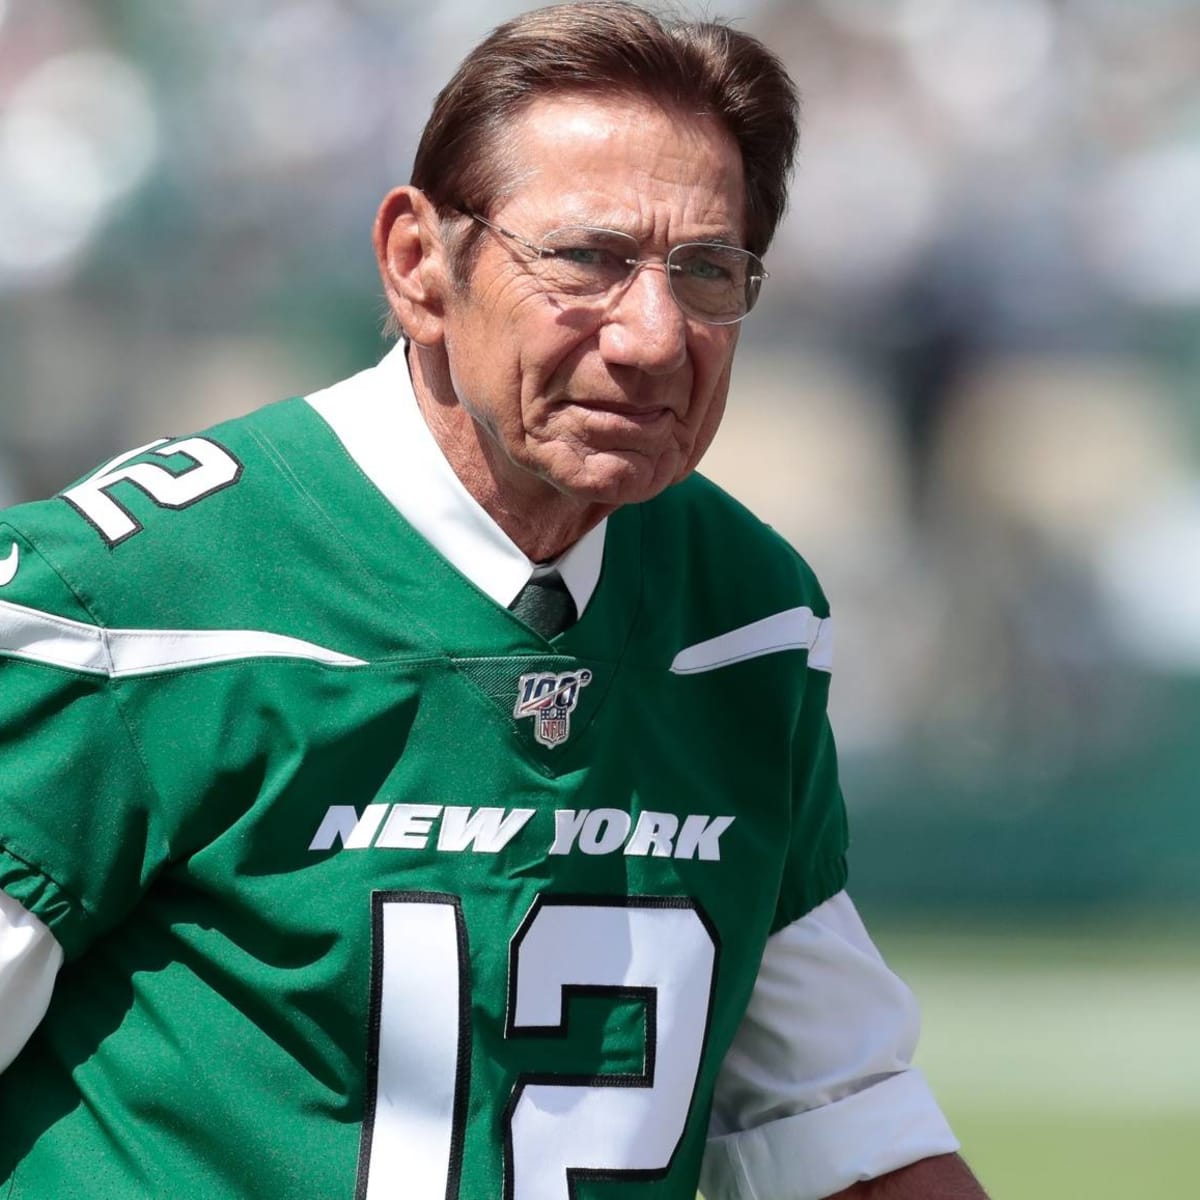 Joe Namath's No. 12 jersey is retired by the Jets. Aaron Rodgers wore No. 12  for the Packers. Now what? - Newsday